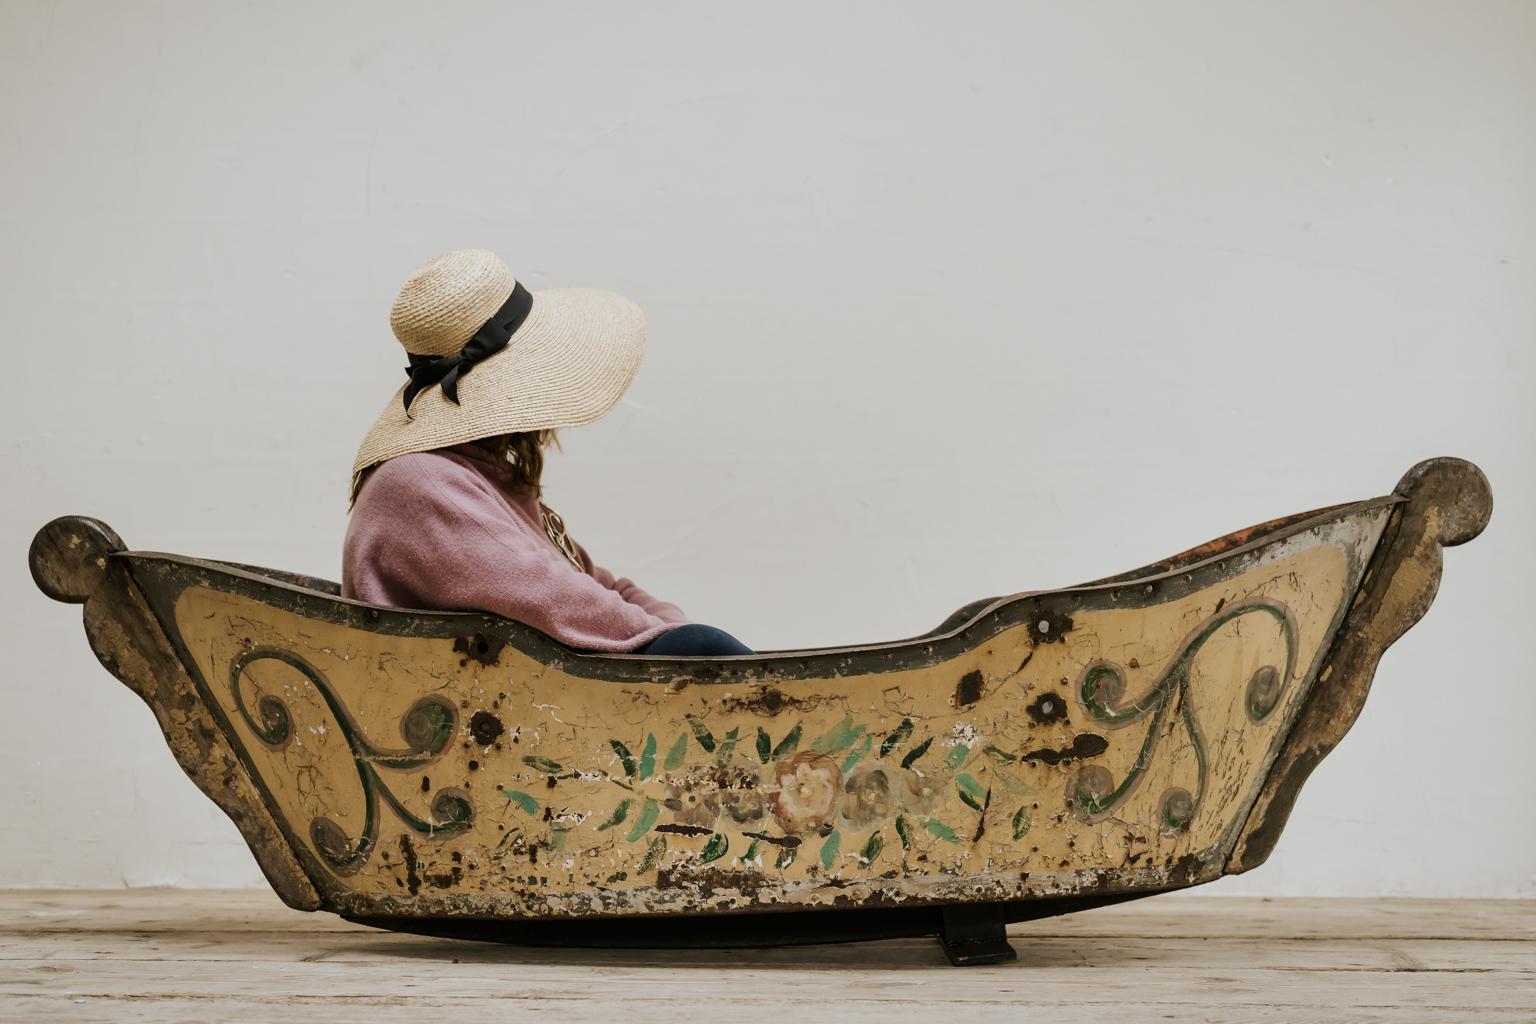 this boat was made for a French carroussel/merry-go-round,
handpainted, beginning of the 20th century, iron and wood,
makes a great planter/jardinière for your garden ... 